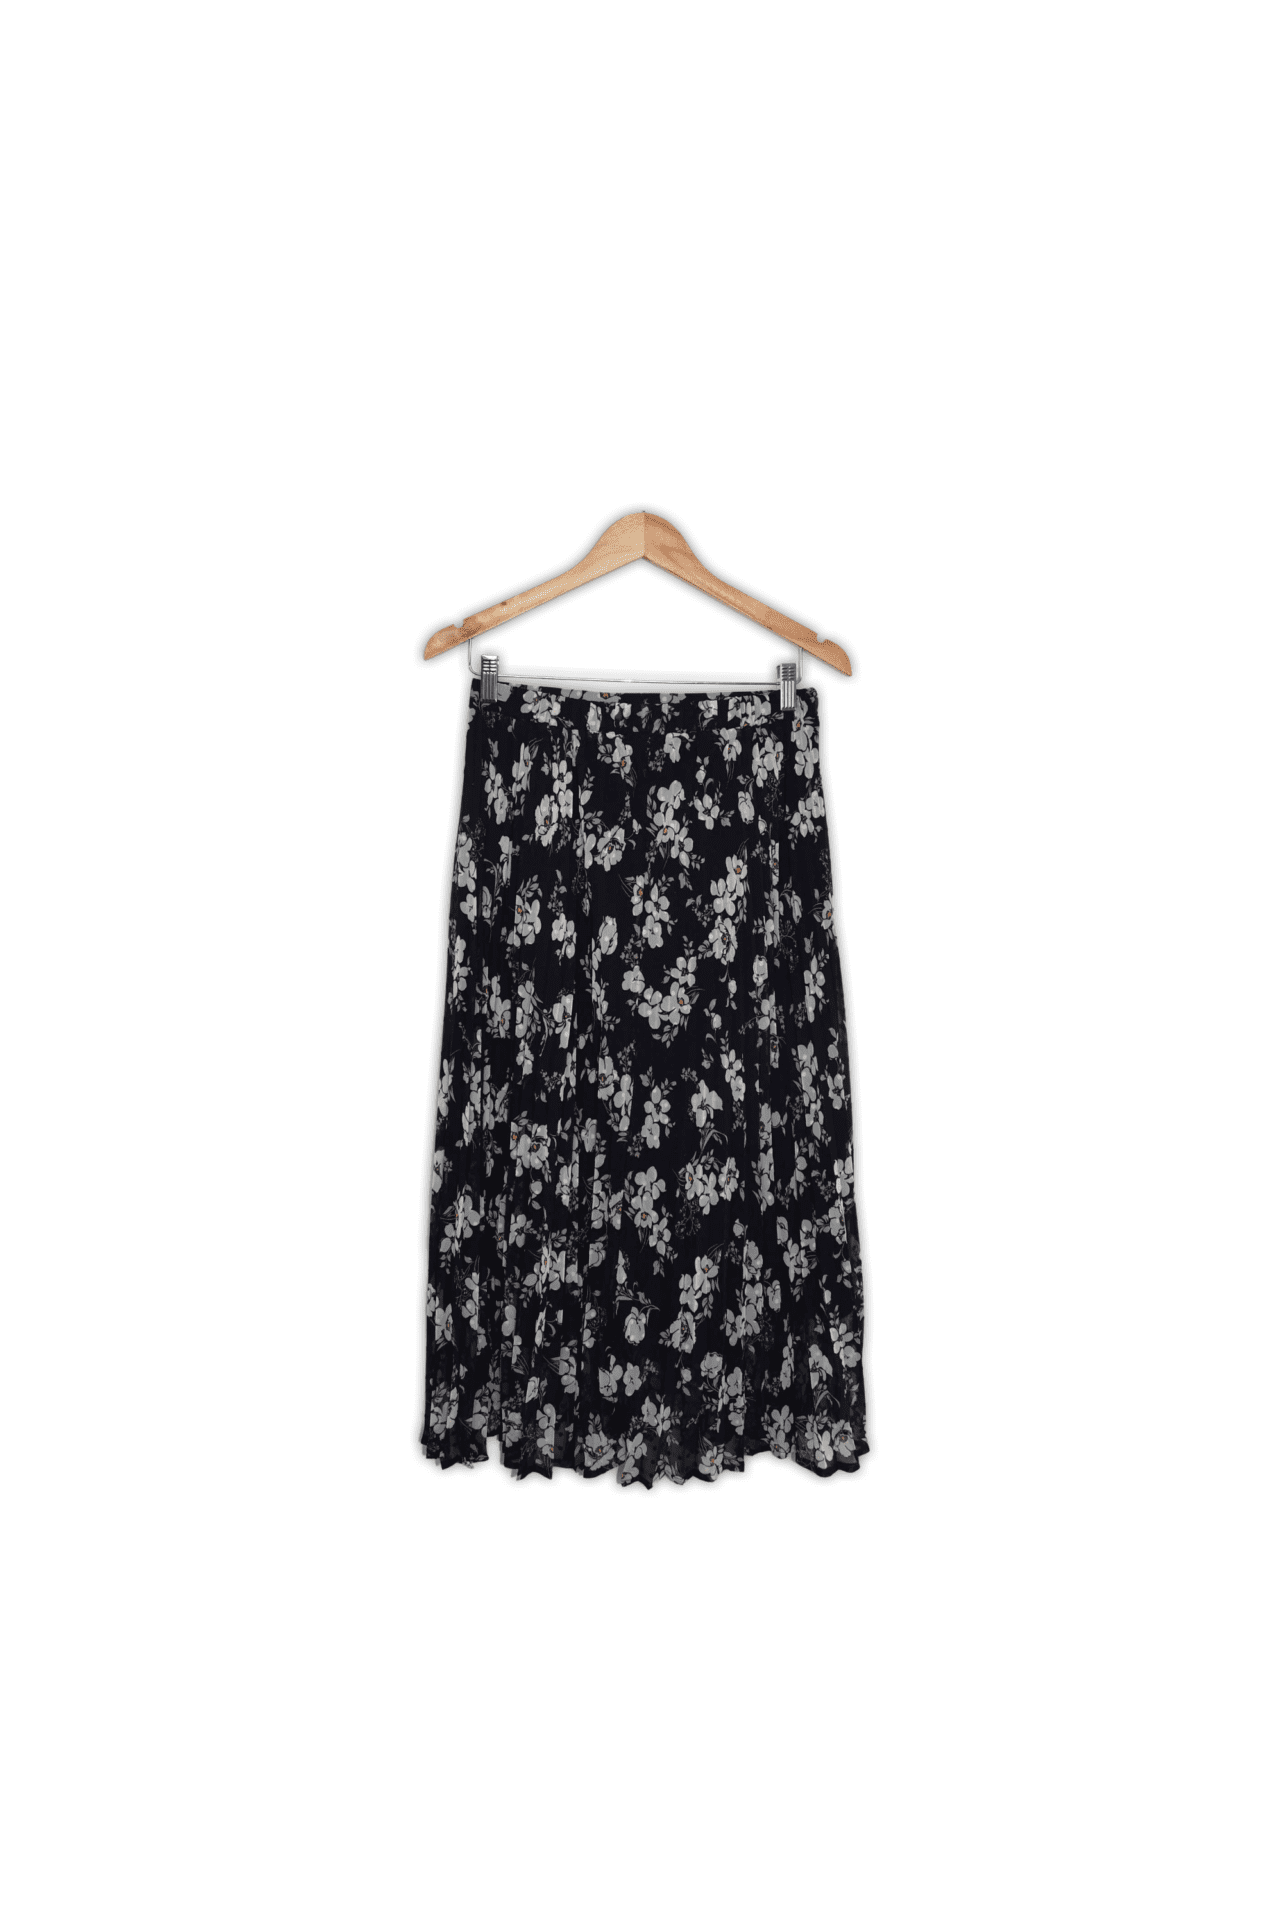 Midi light weight skirt featuring an accordion pleat and an elasticated waist band. Size 10/S, black and floral spot